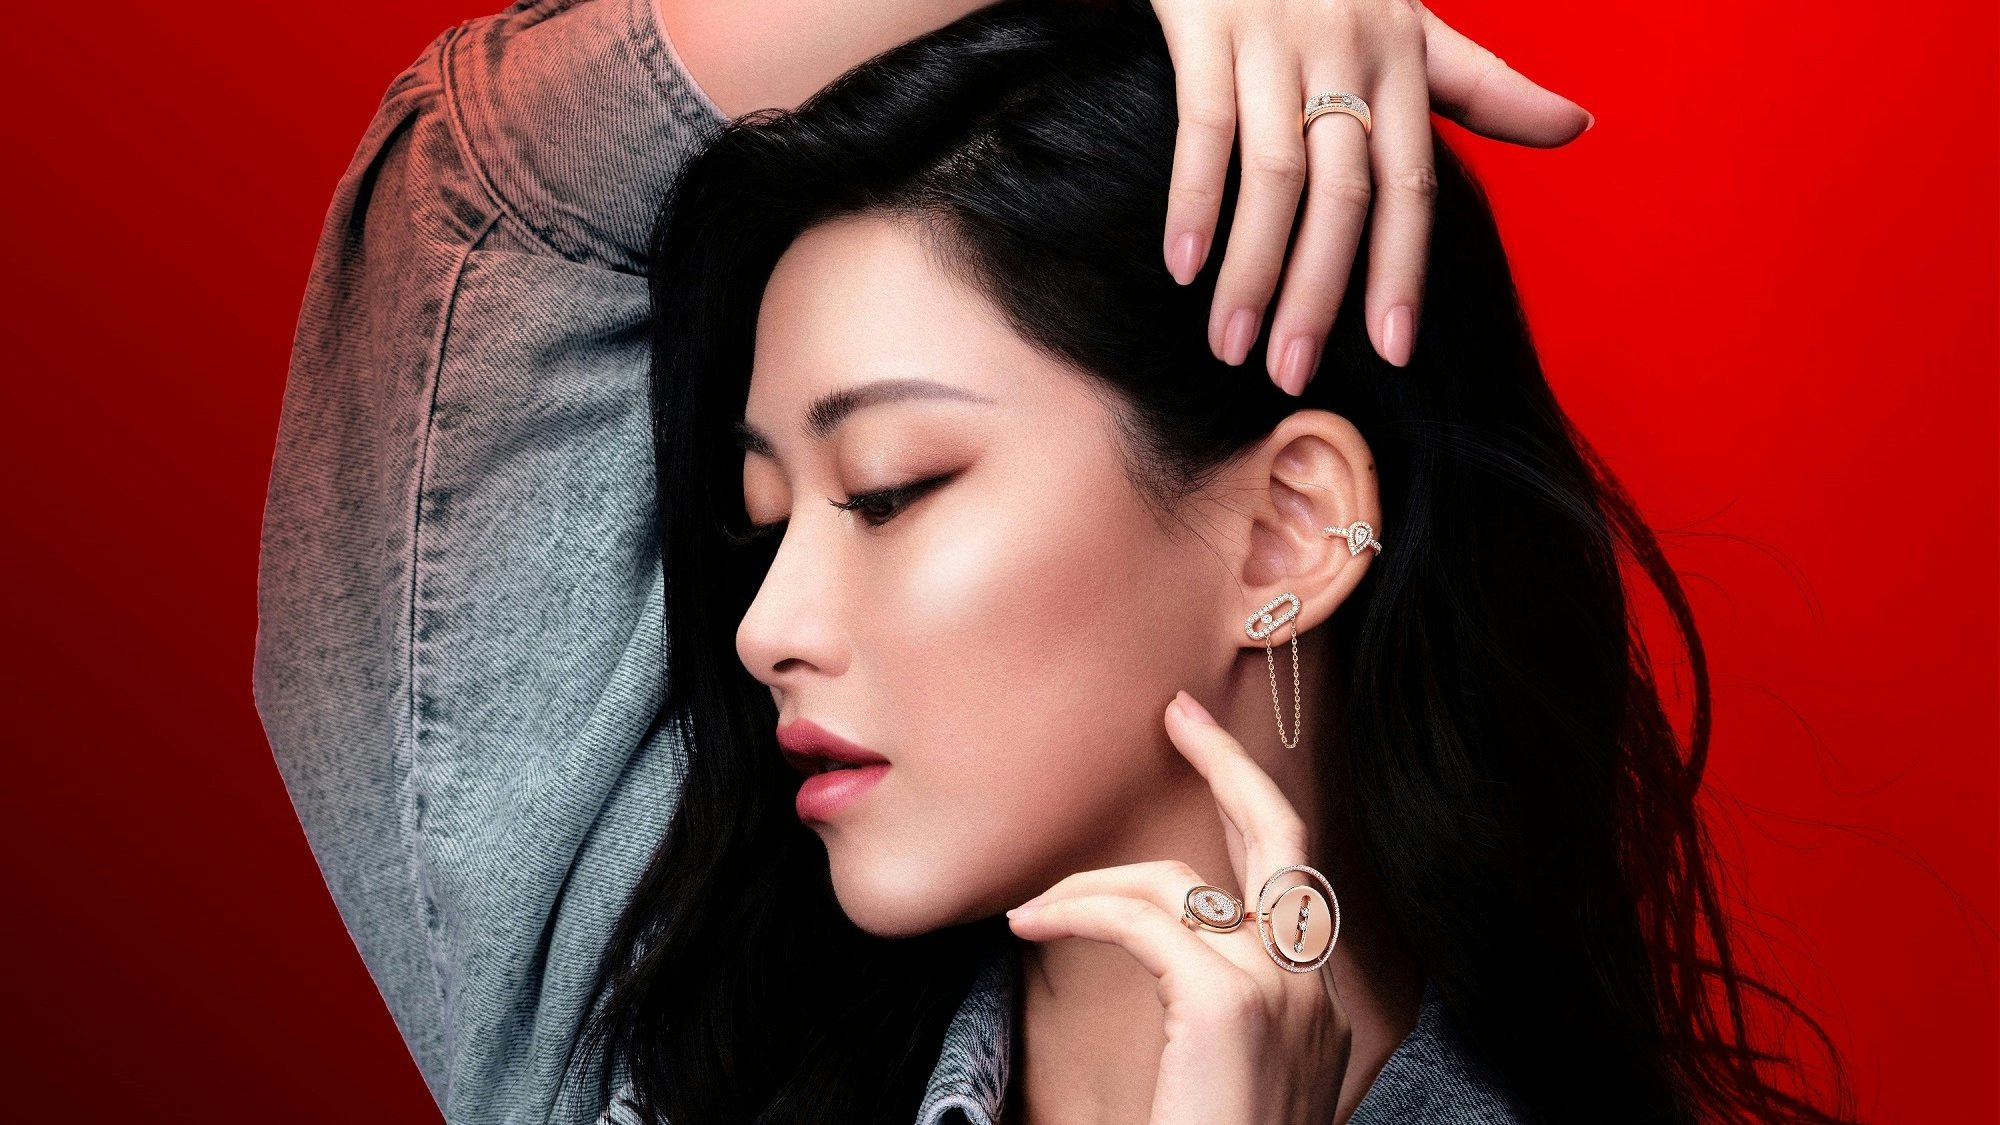 Paris-based jeweler Messika launched on Tmall Luxury Pavilion in April and plans integrate 3D technology into its flagship store in the future. Photo: Messika